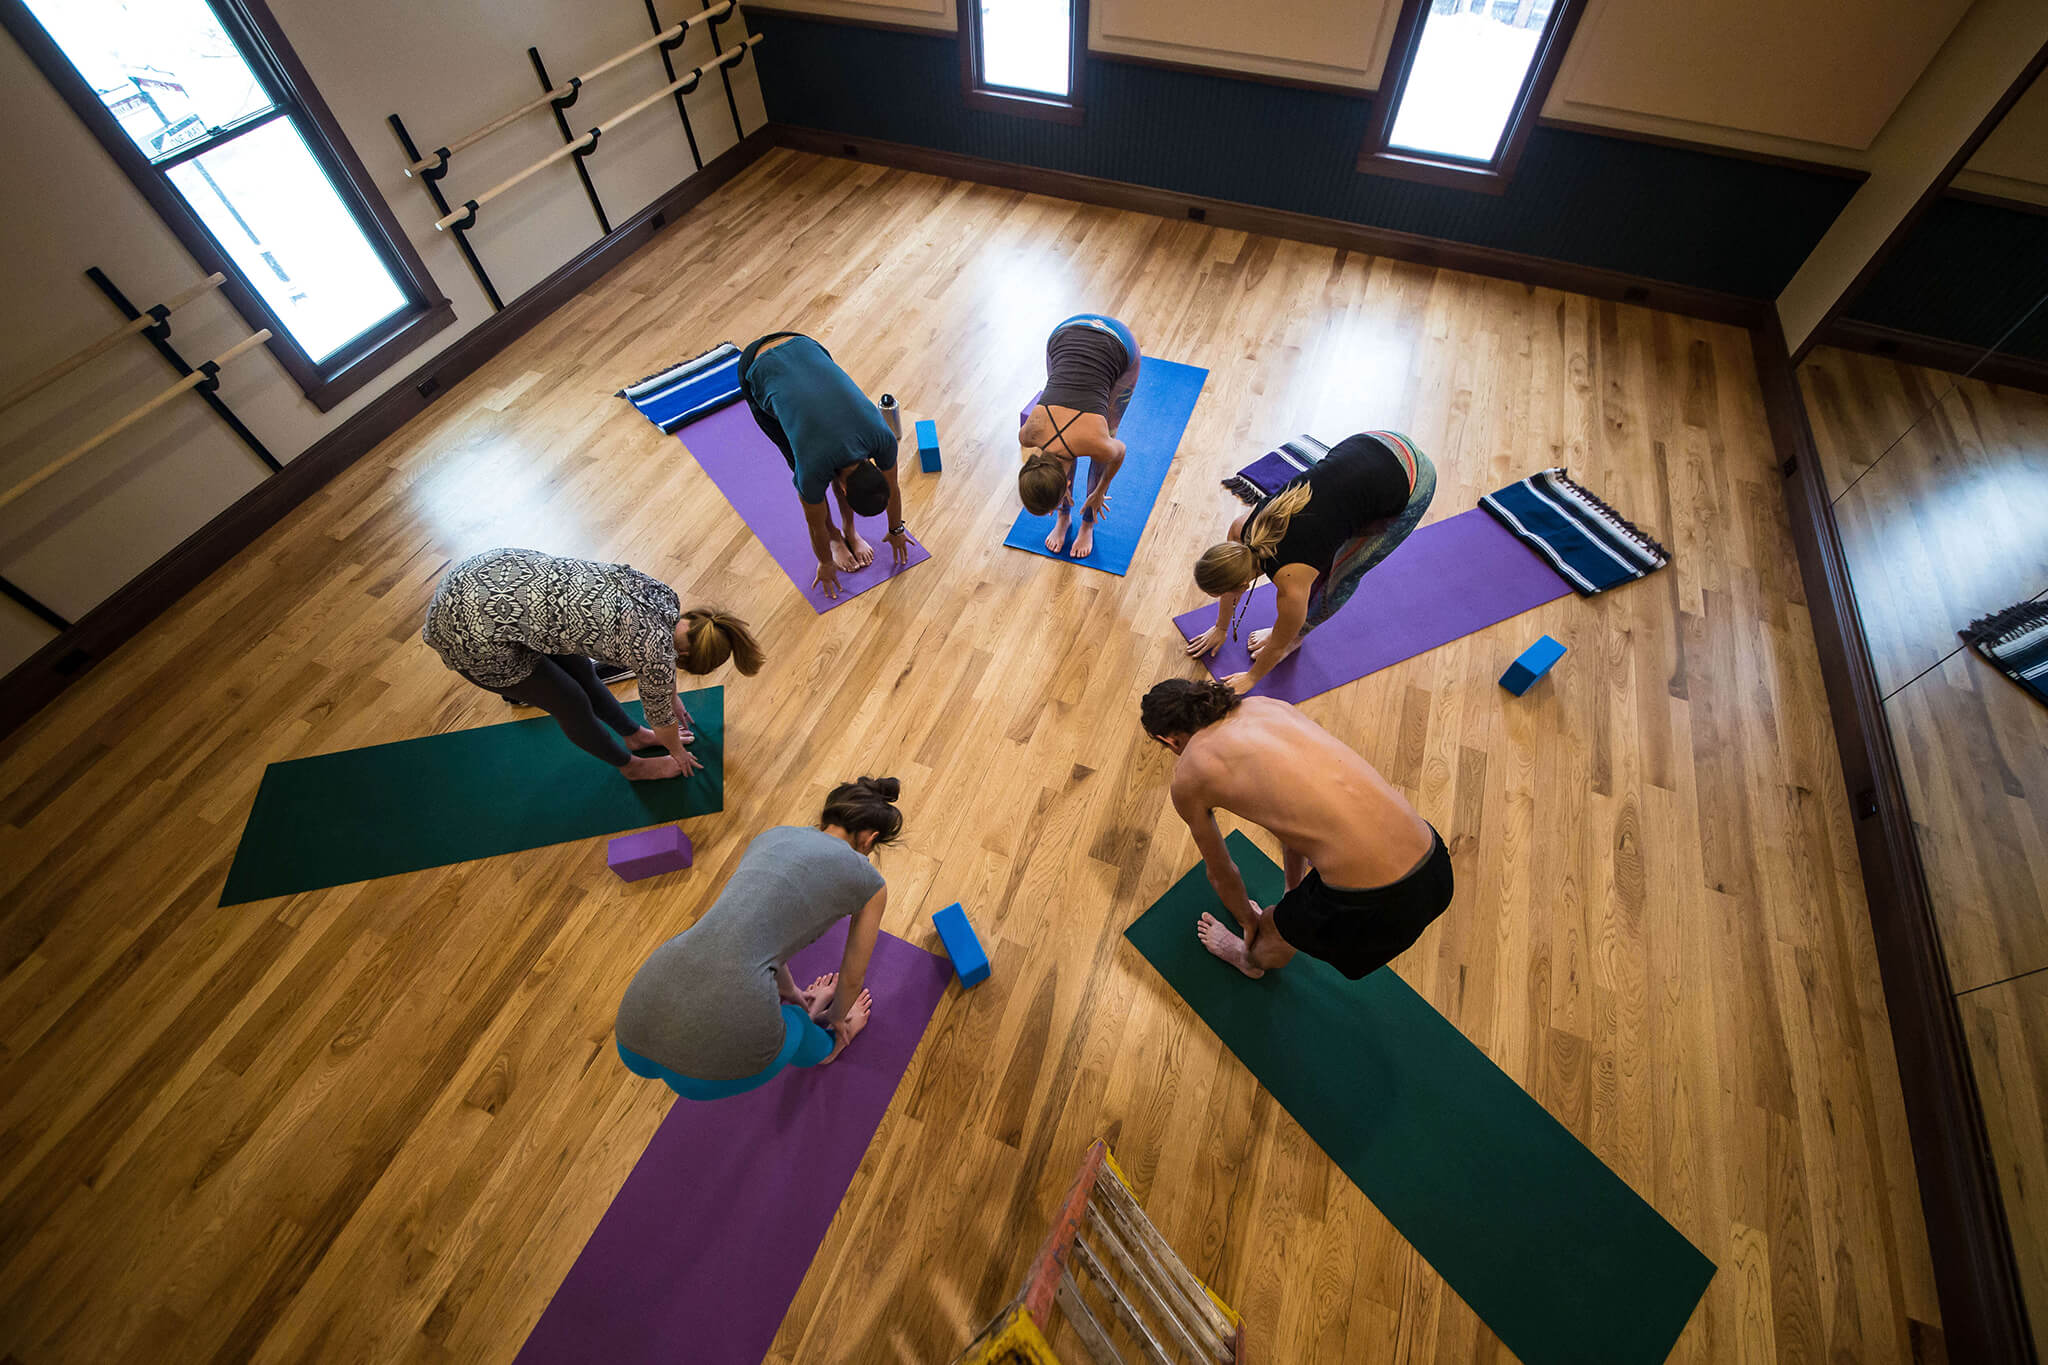 A circle of people practicing indoor yoga in Breckenridge.